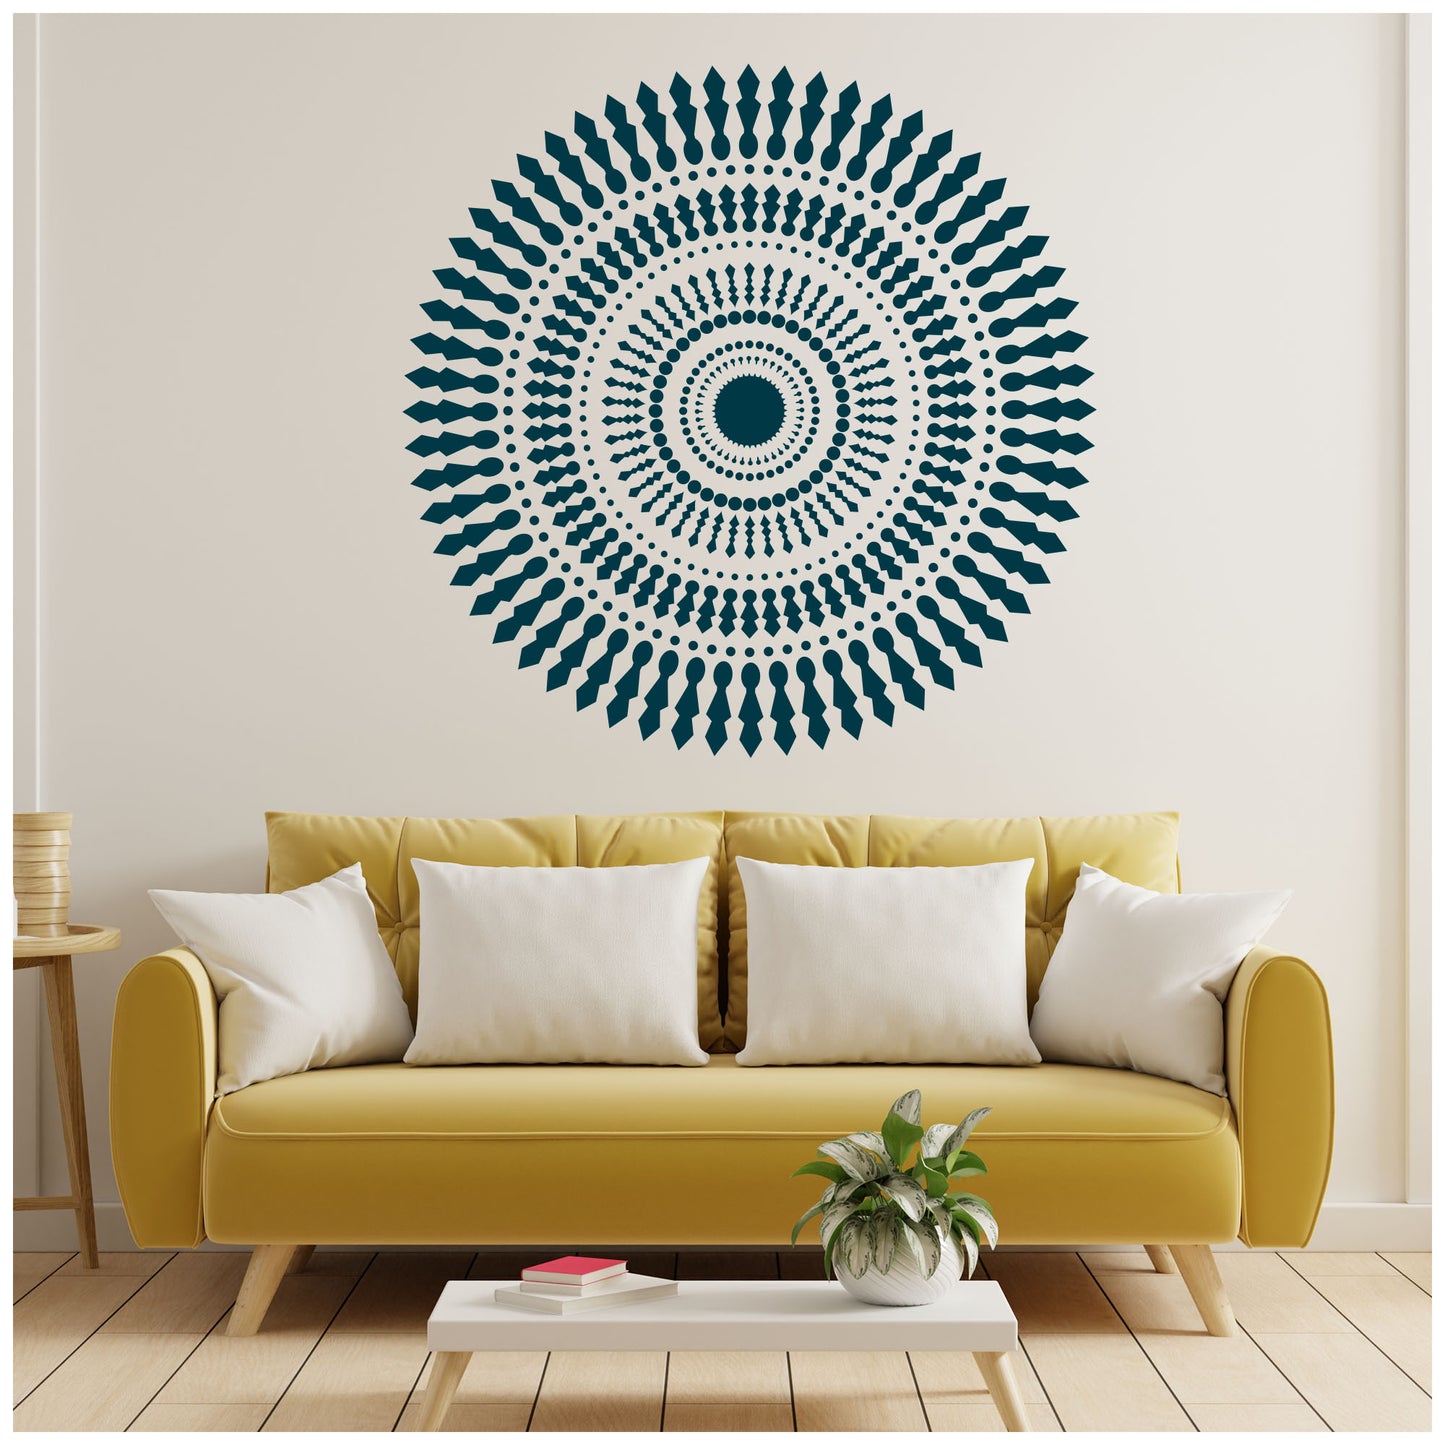 Funky Spin Cycle Mandala Design Stencil for Wall Painting (KDMD1488)